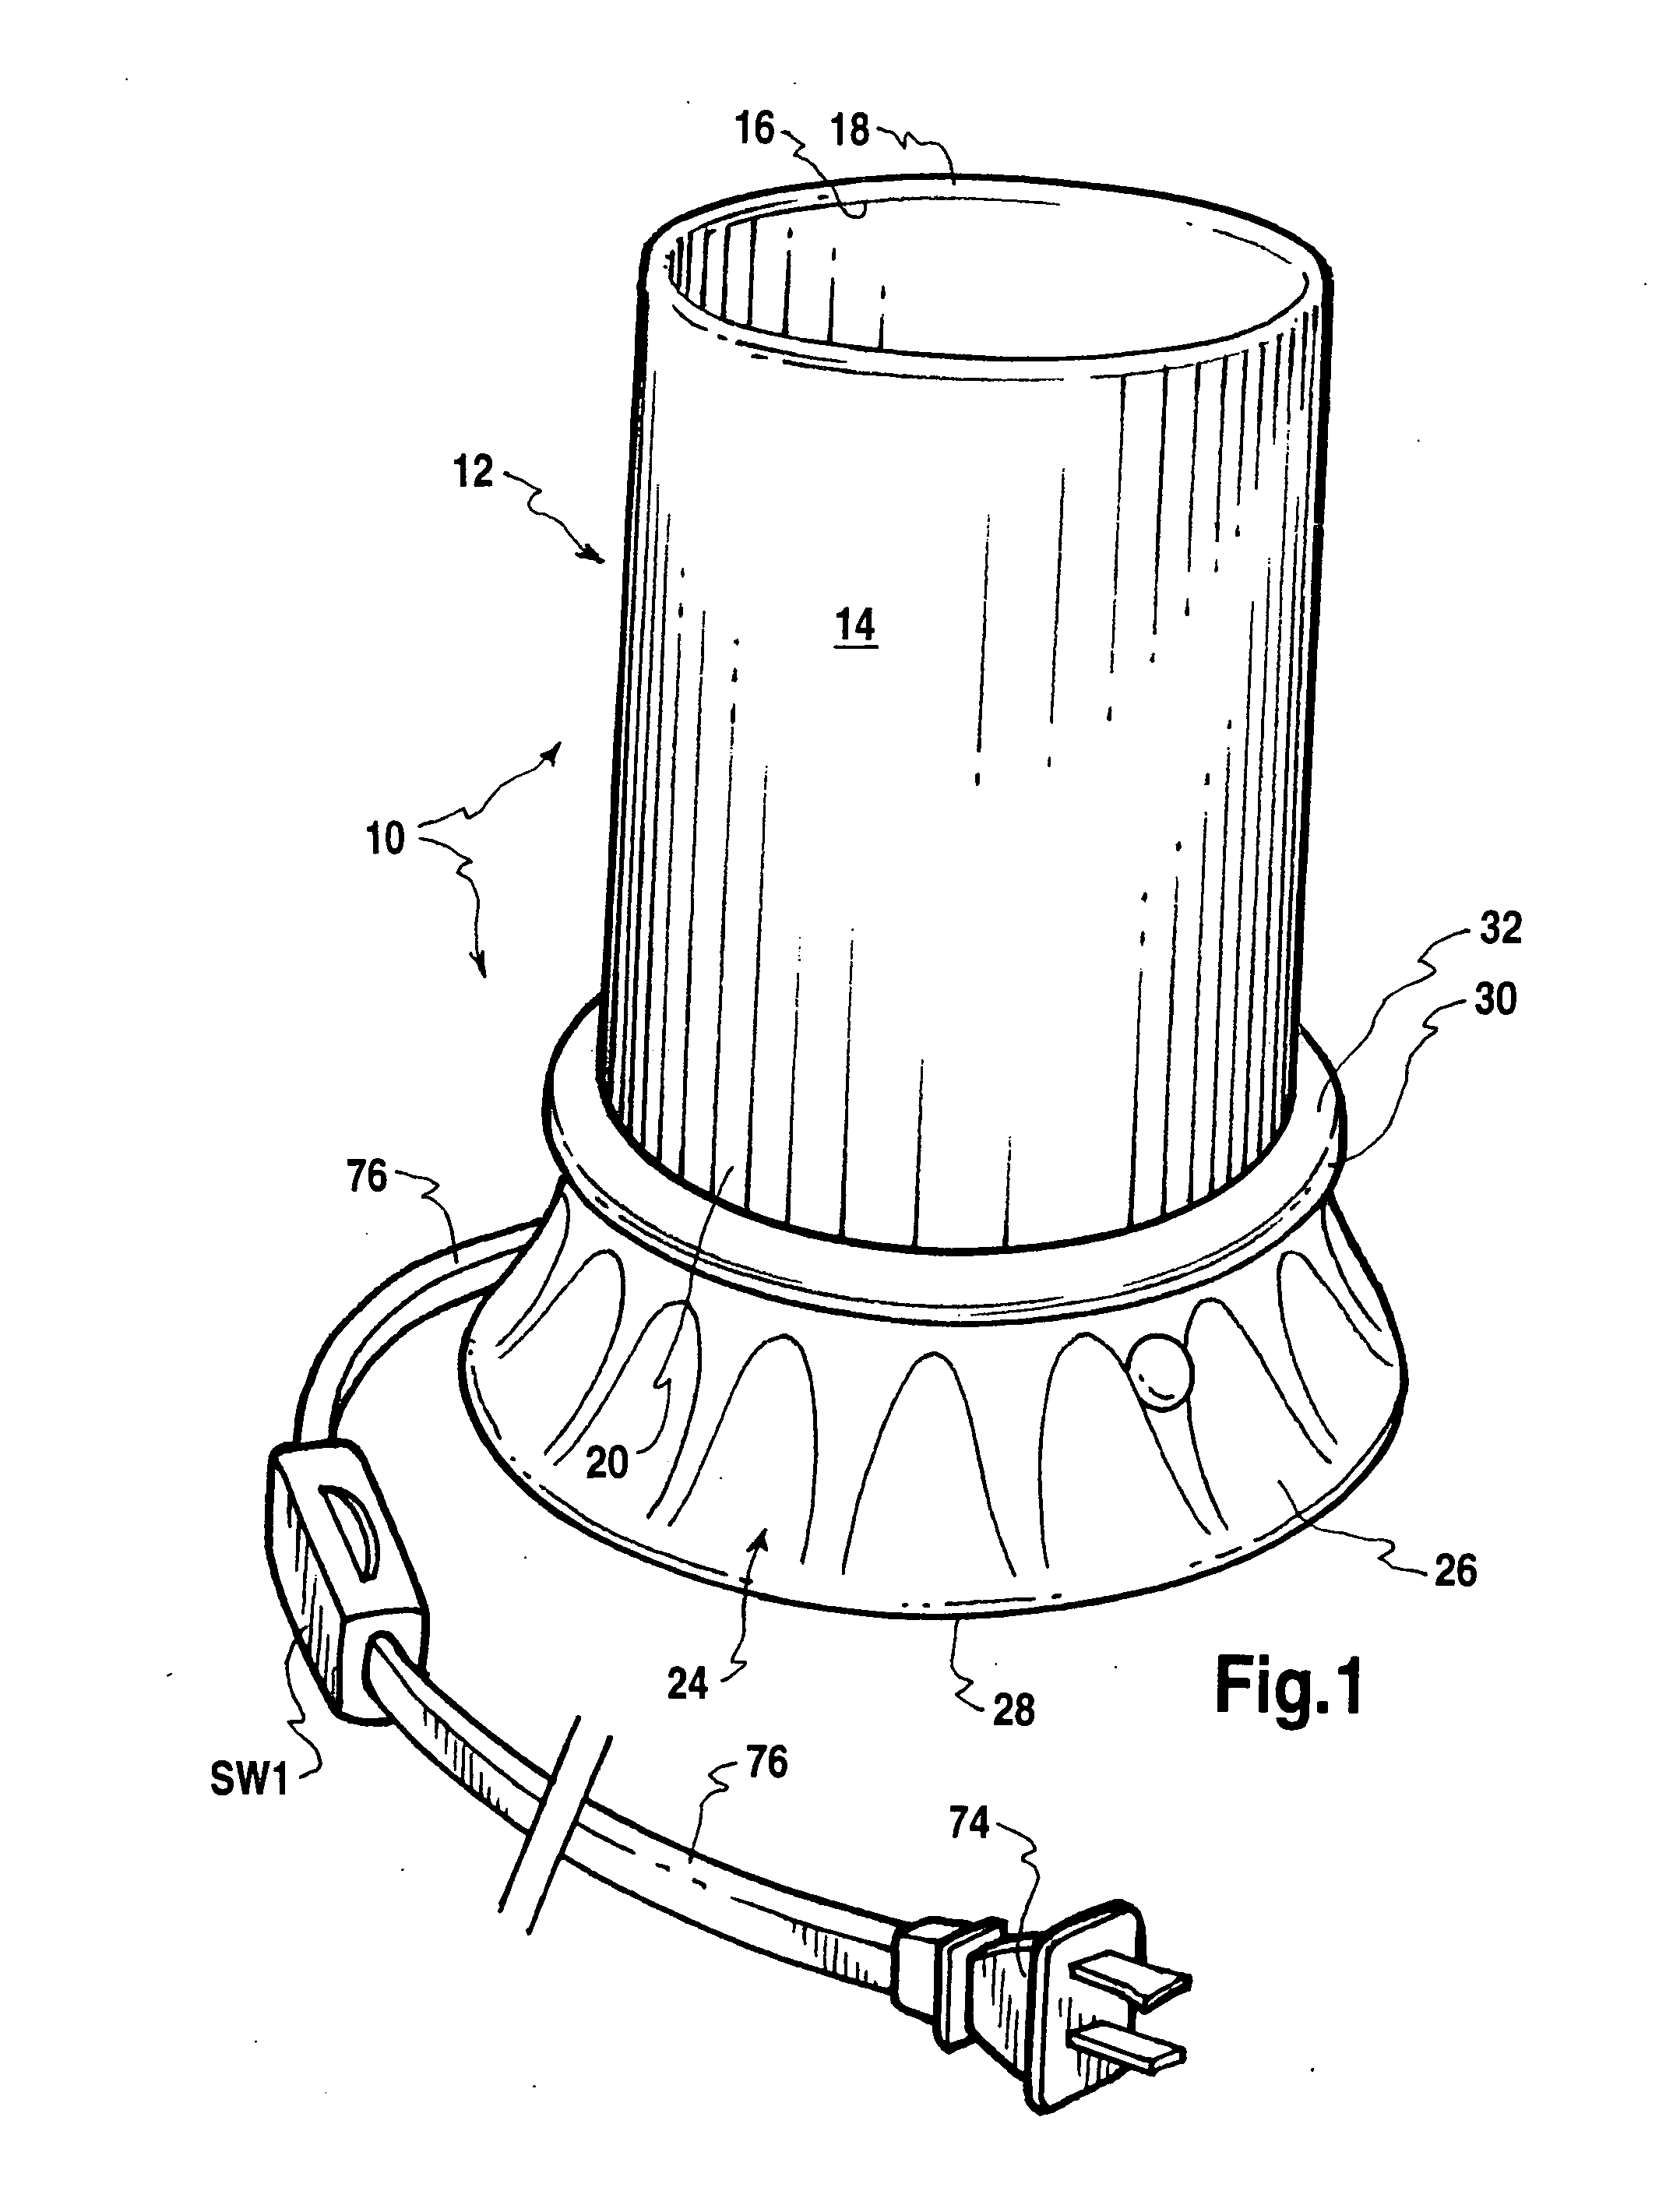 Flameless fragrance warming apparatus and methods